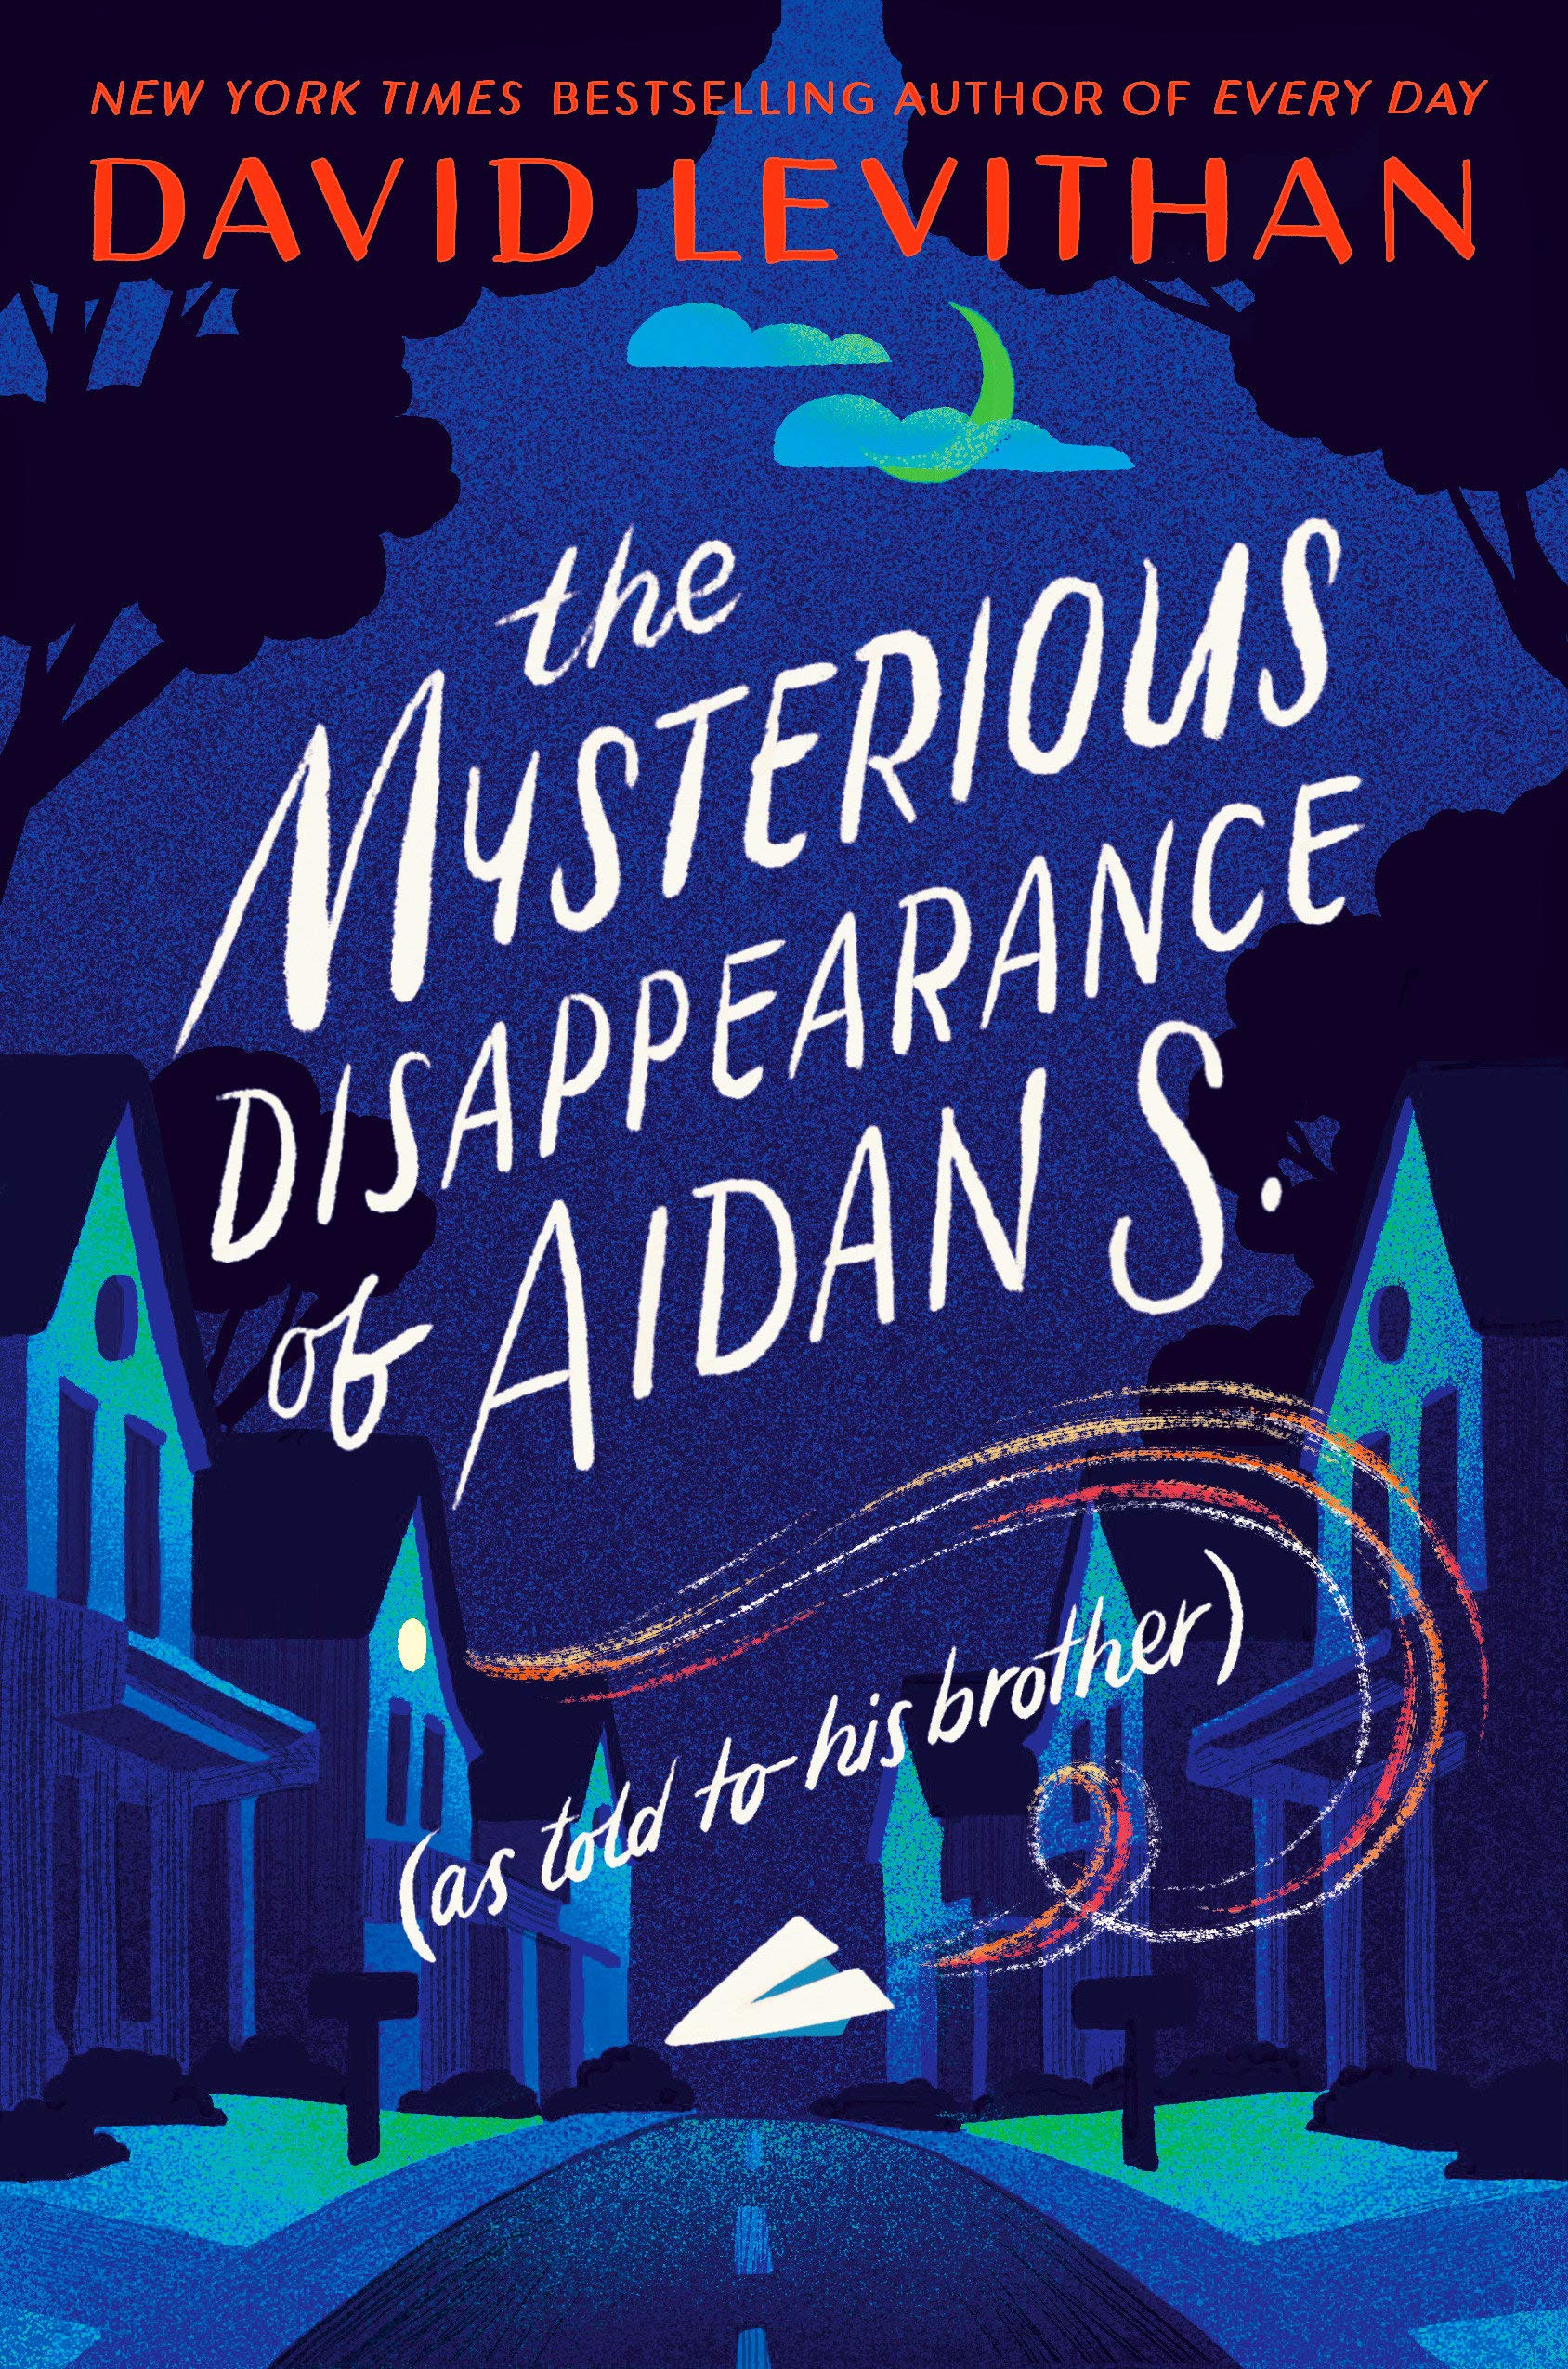 Read more about the article The Mysterious Disappearance of Aidan S. (as told to his brother) by David Levithan